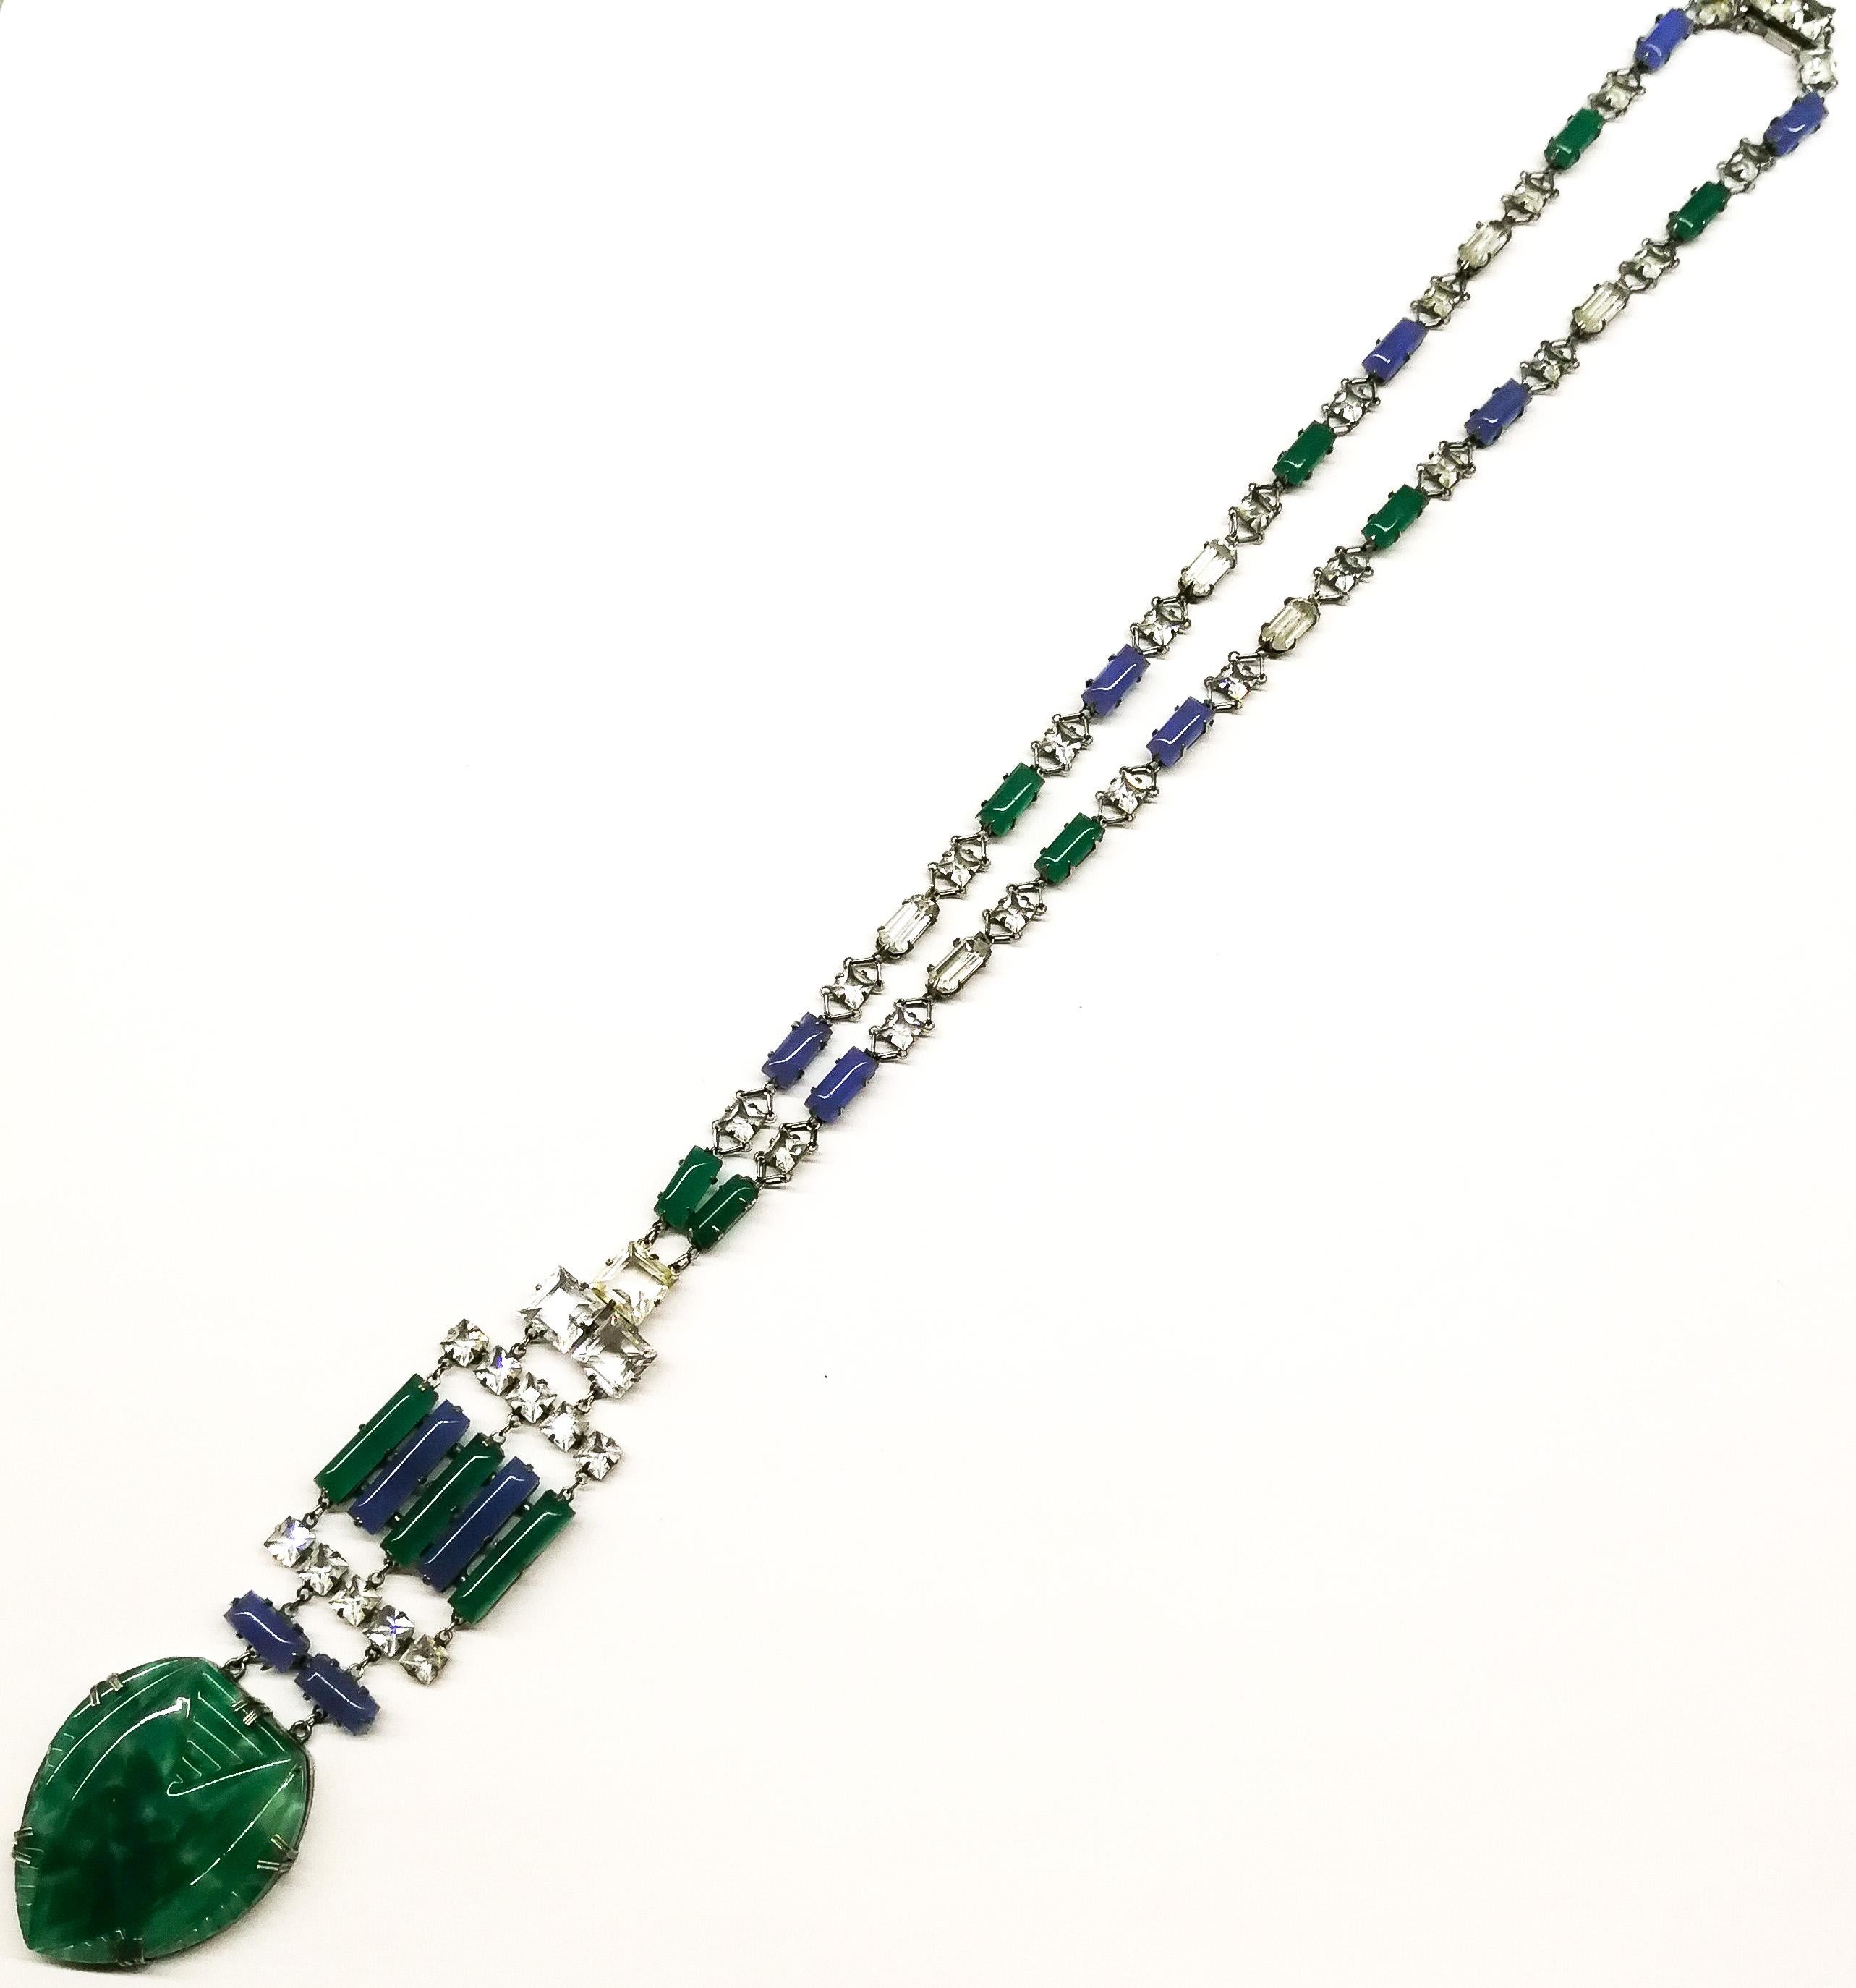 An outstanding Art Deco pendant necklace in highly characteristic colour and design.
It is composed of blue and green chalcedony glass rounded baguettes throughout, highlighted with clear cut paste rectangular and square faceted stones. The striking